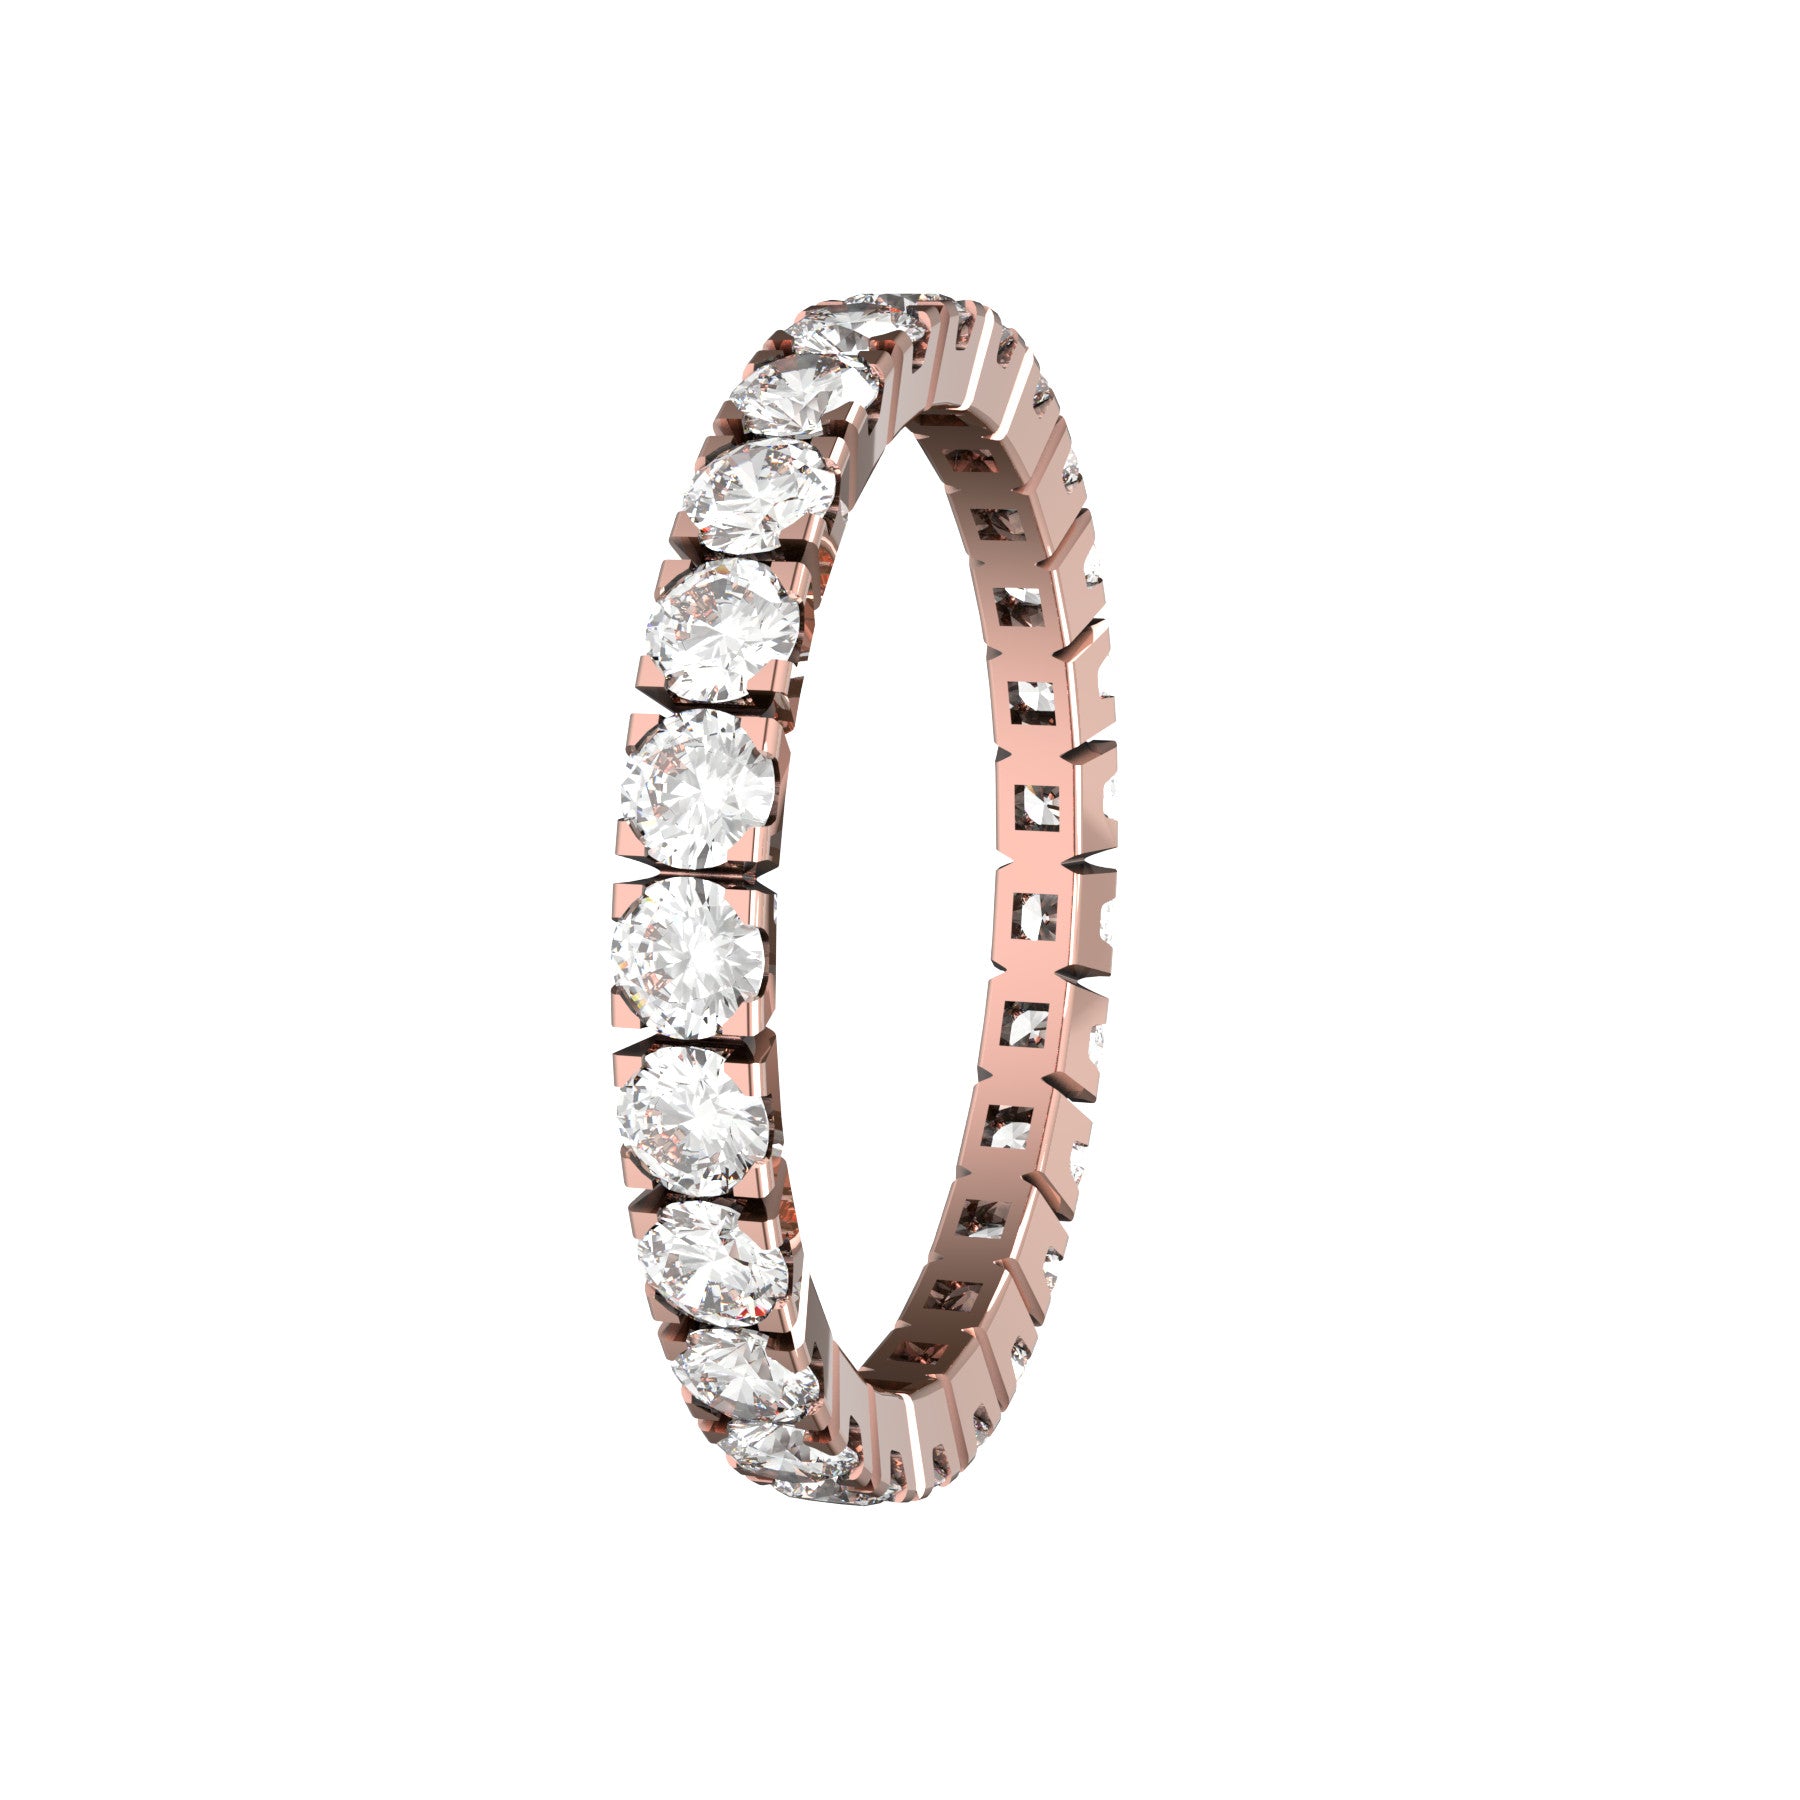 forever wedding ring, 18 K pink gold, 0,05 ct round natural diamond, weight about 1,7 g. (0.06 oz), width 2,40 mm